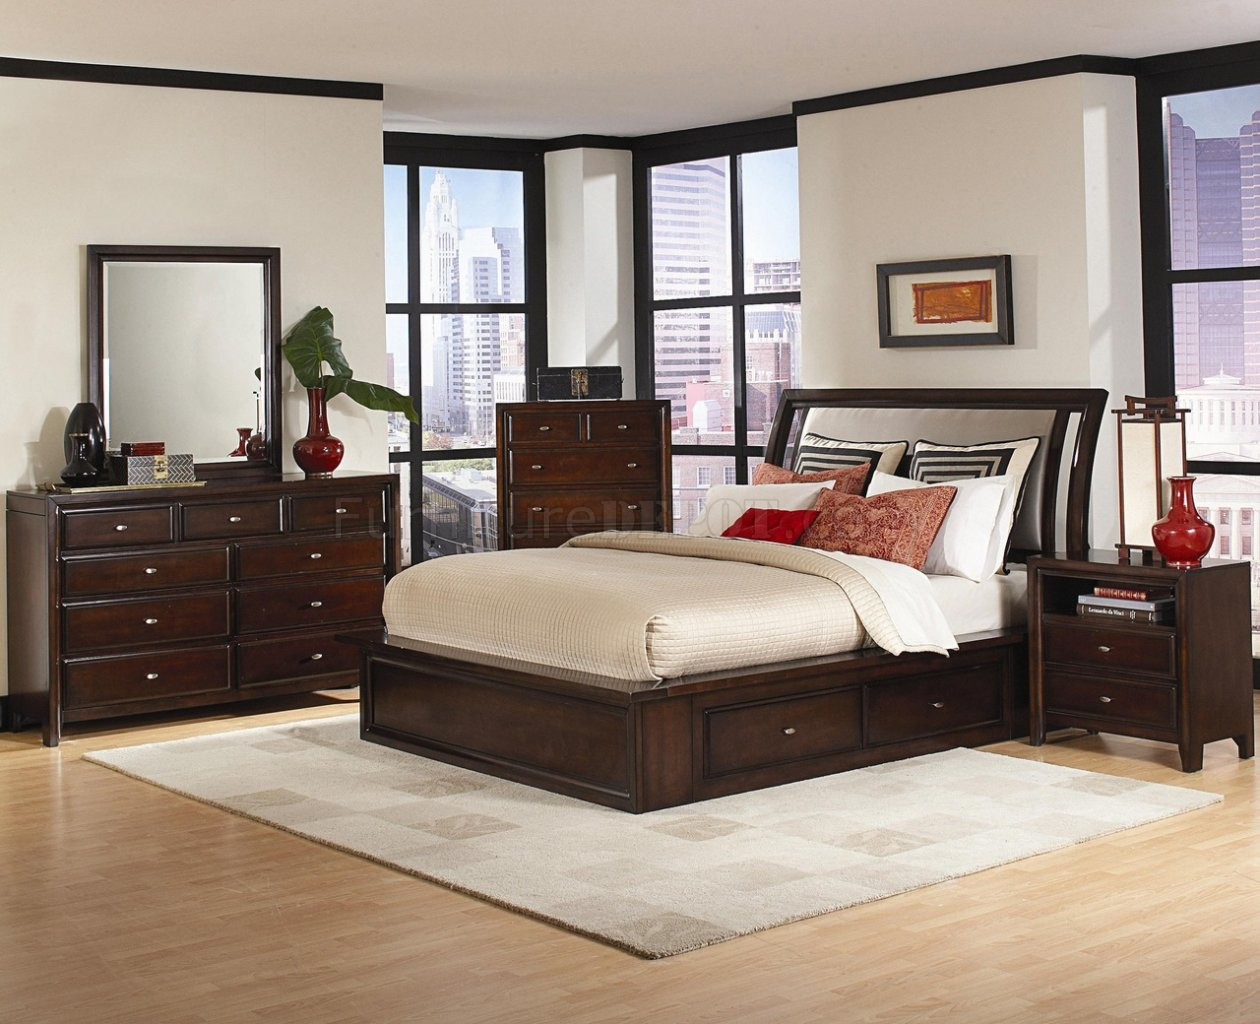 Bedroom Sets With Storage
 Distressed Cherry Finish Contemporary Bedroom W Storage Bed